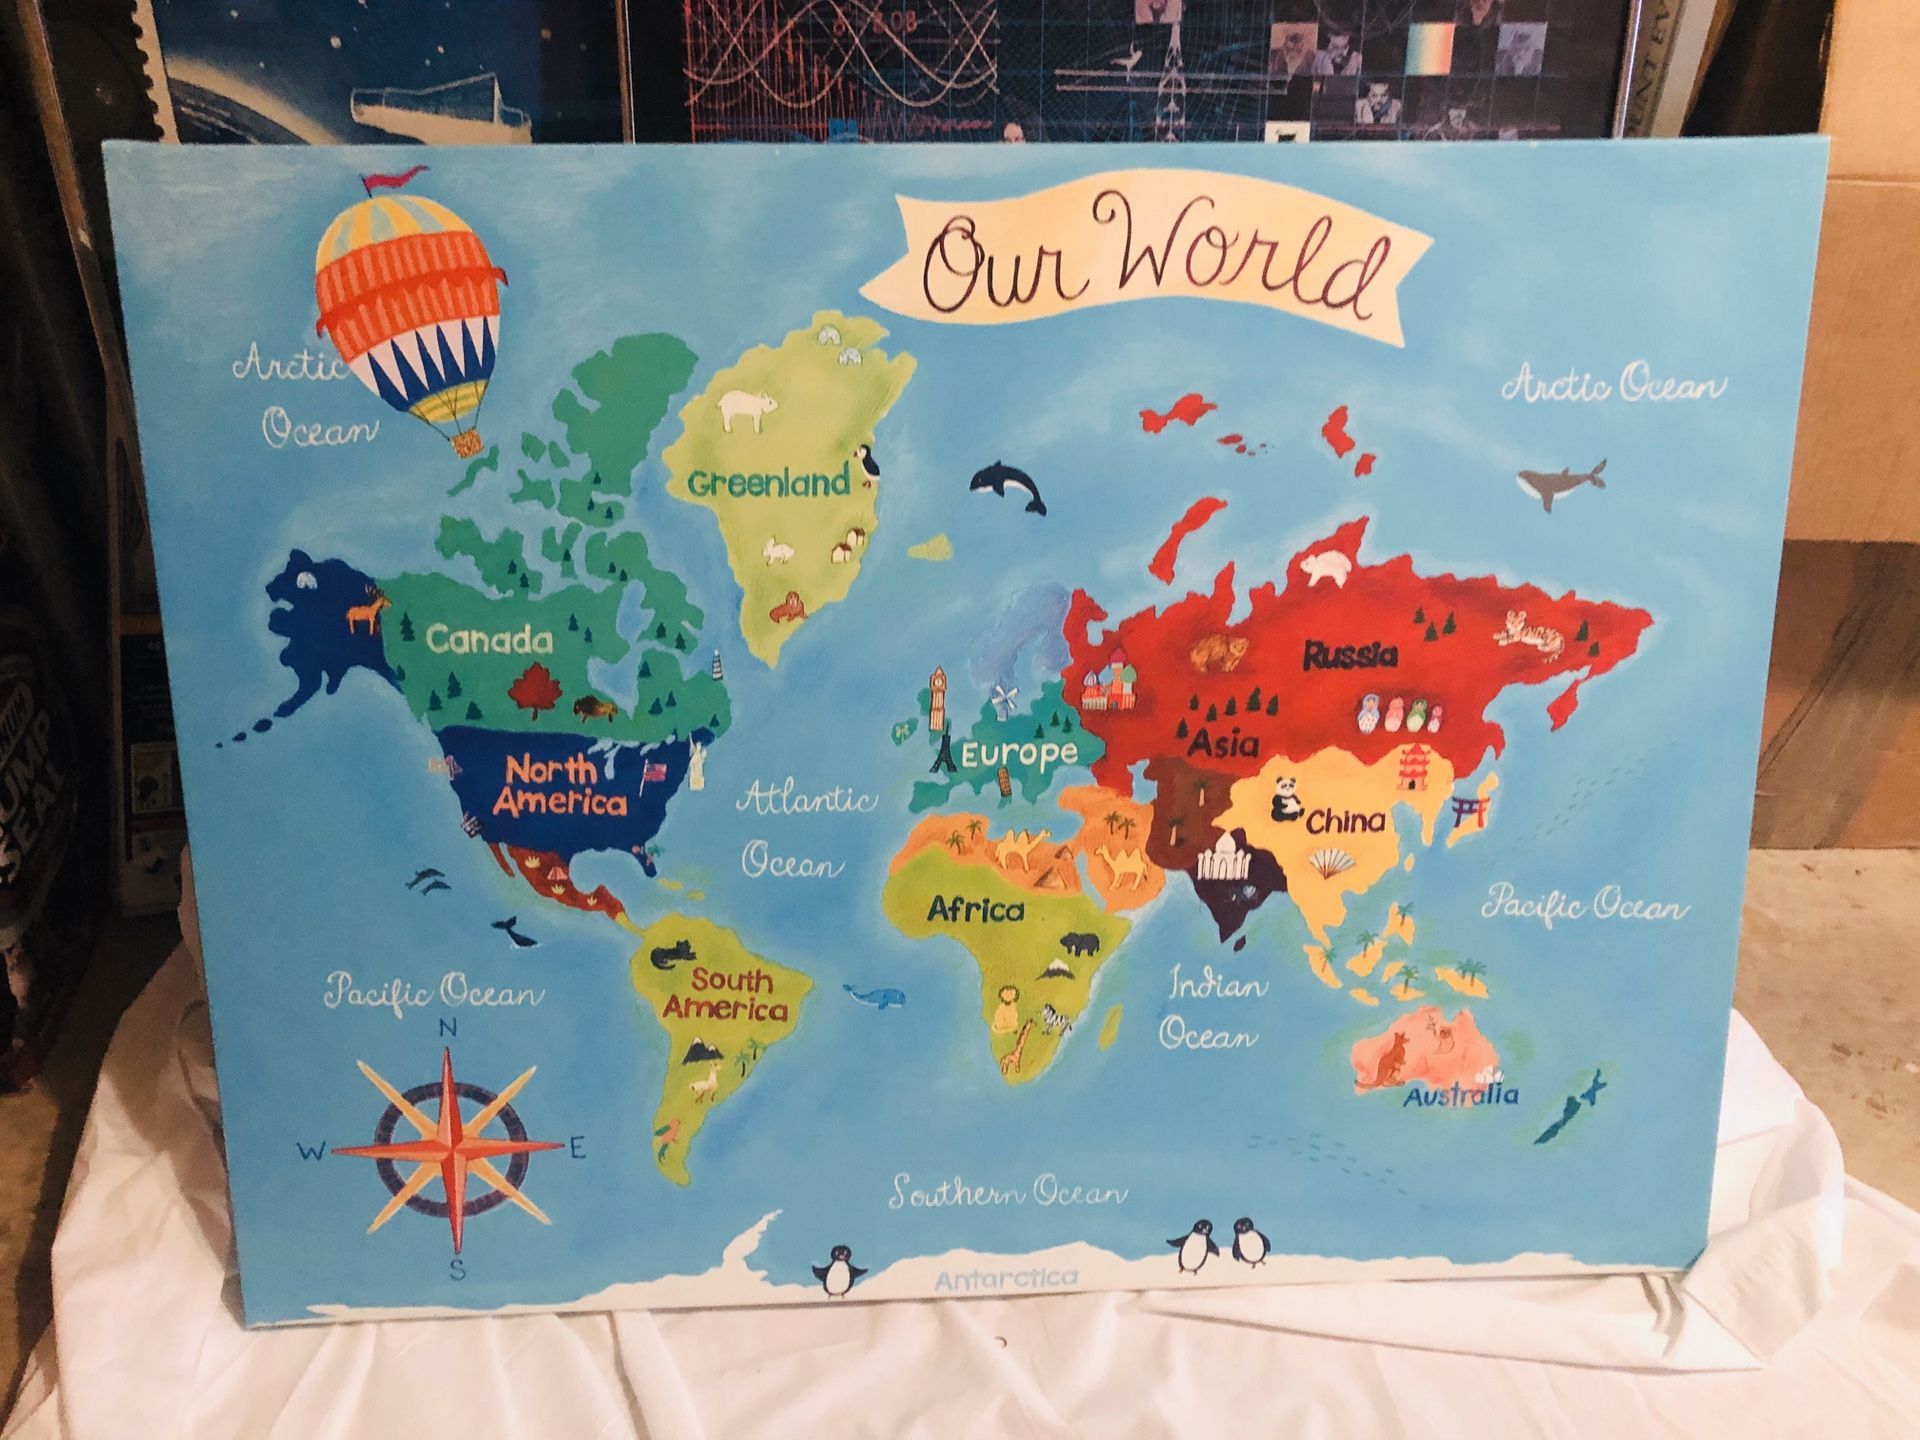 World Map Wall Painting